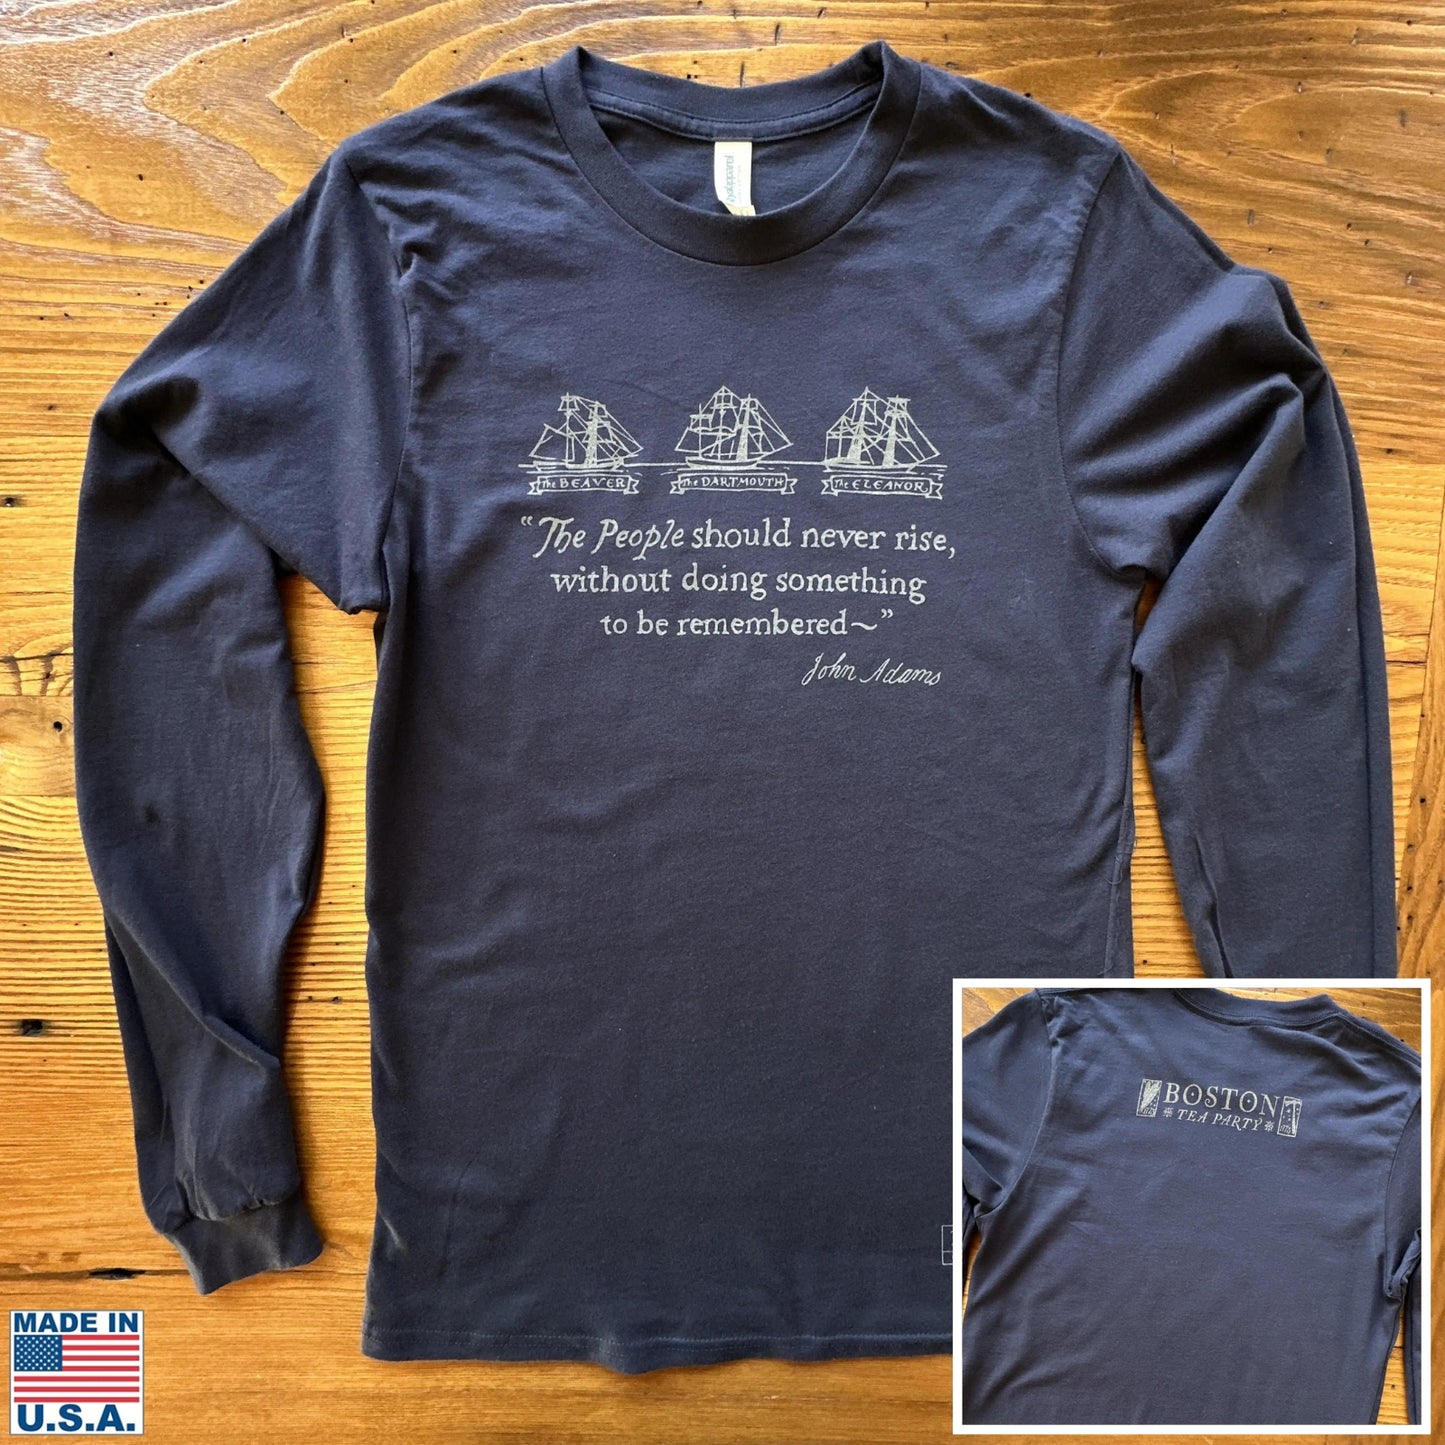 Boston Tea Party 250th Anniversary Long-sleeved Shirt Made in America — 100% Organic Cotton